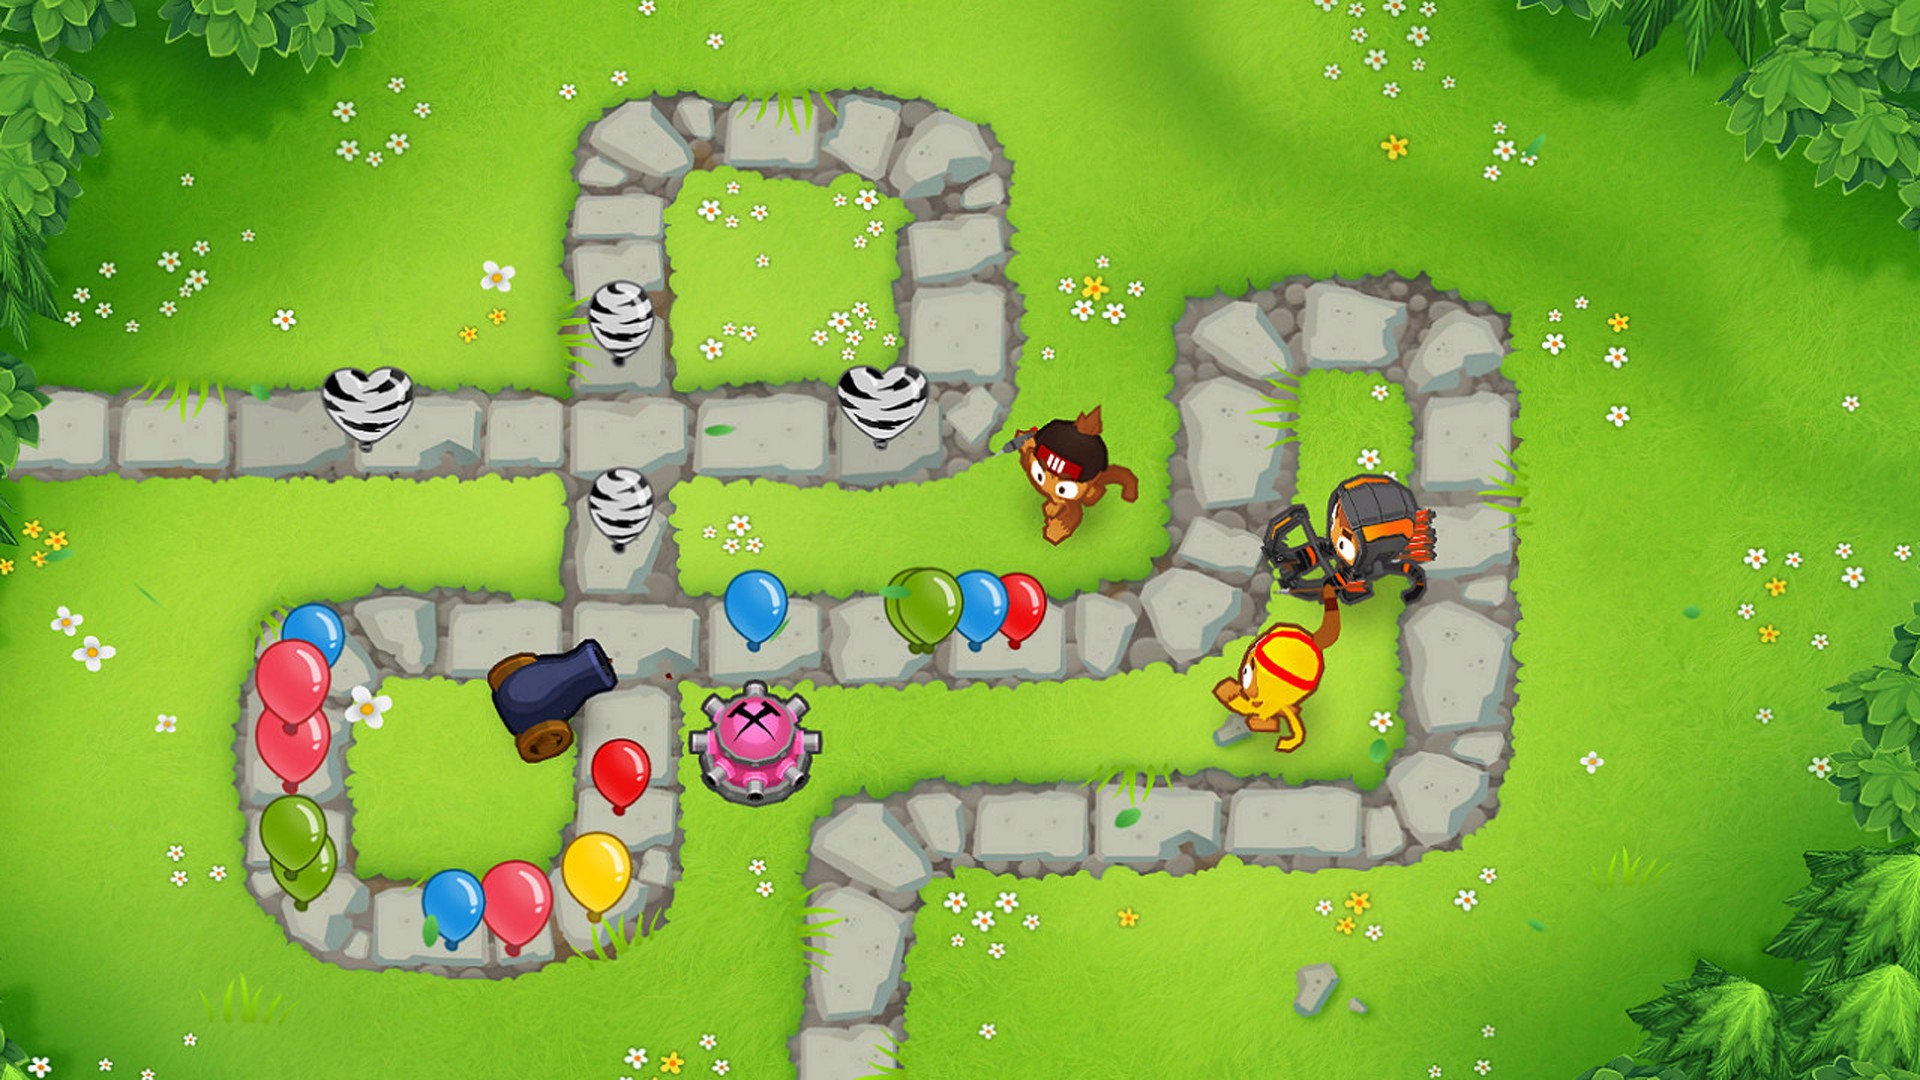 Best tower defense games: balloons make their way along a stone path in a grassy field, with turrets on in Bloons 6.